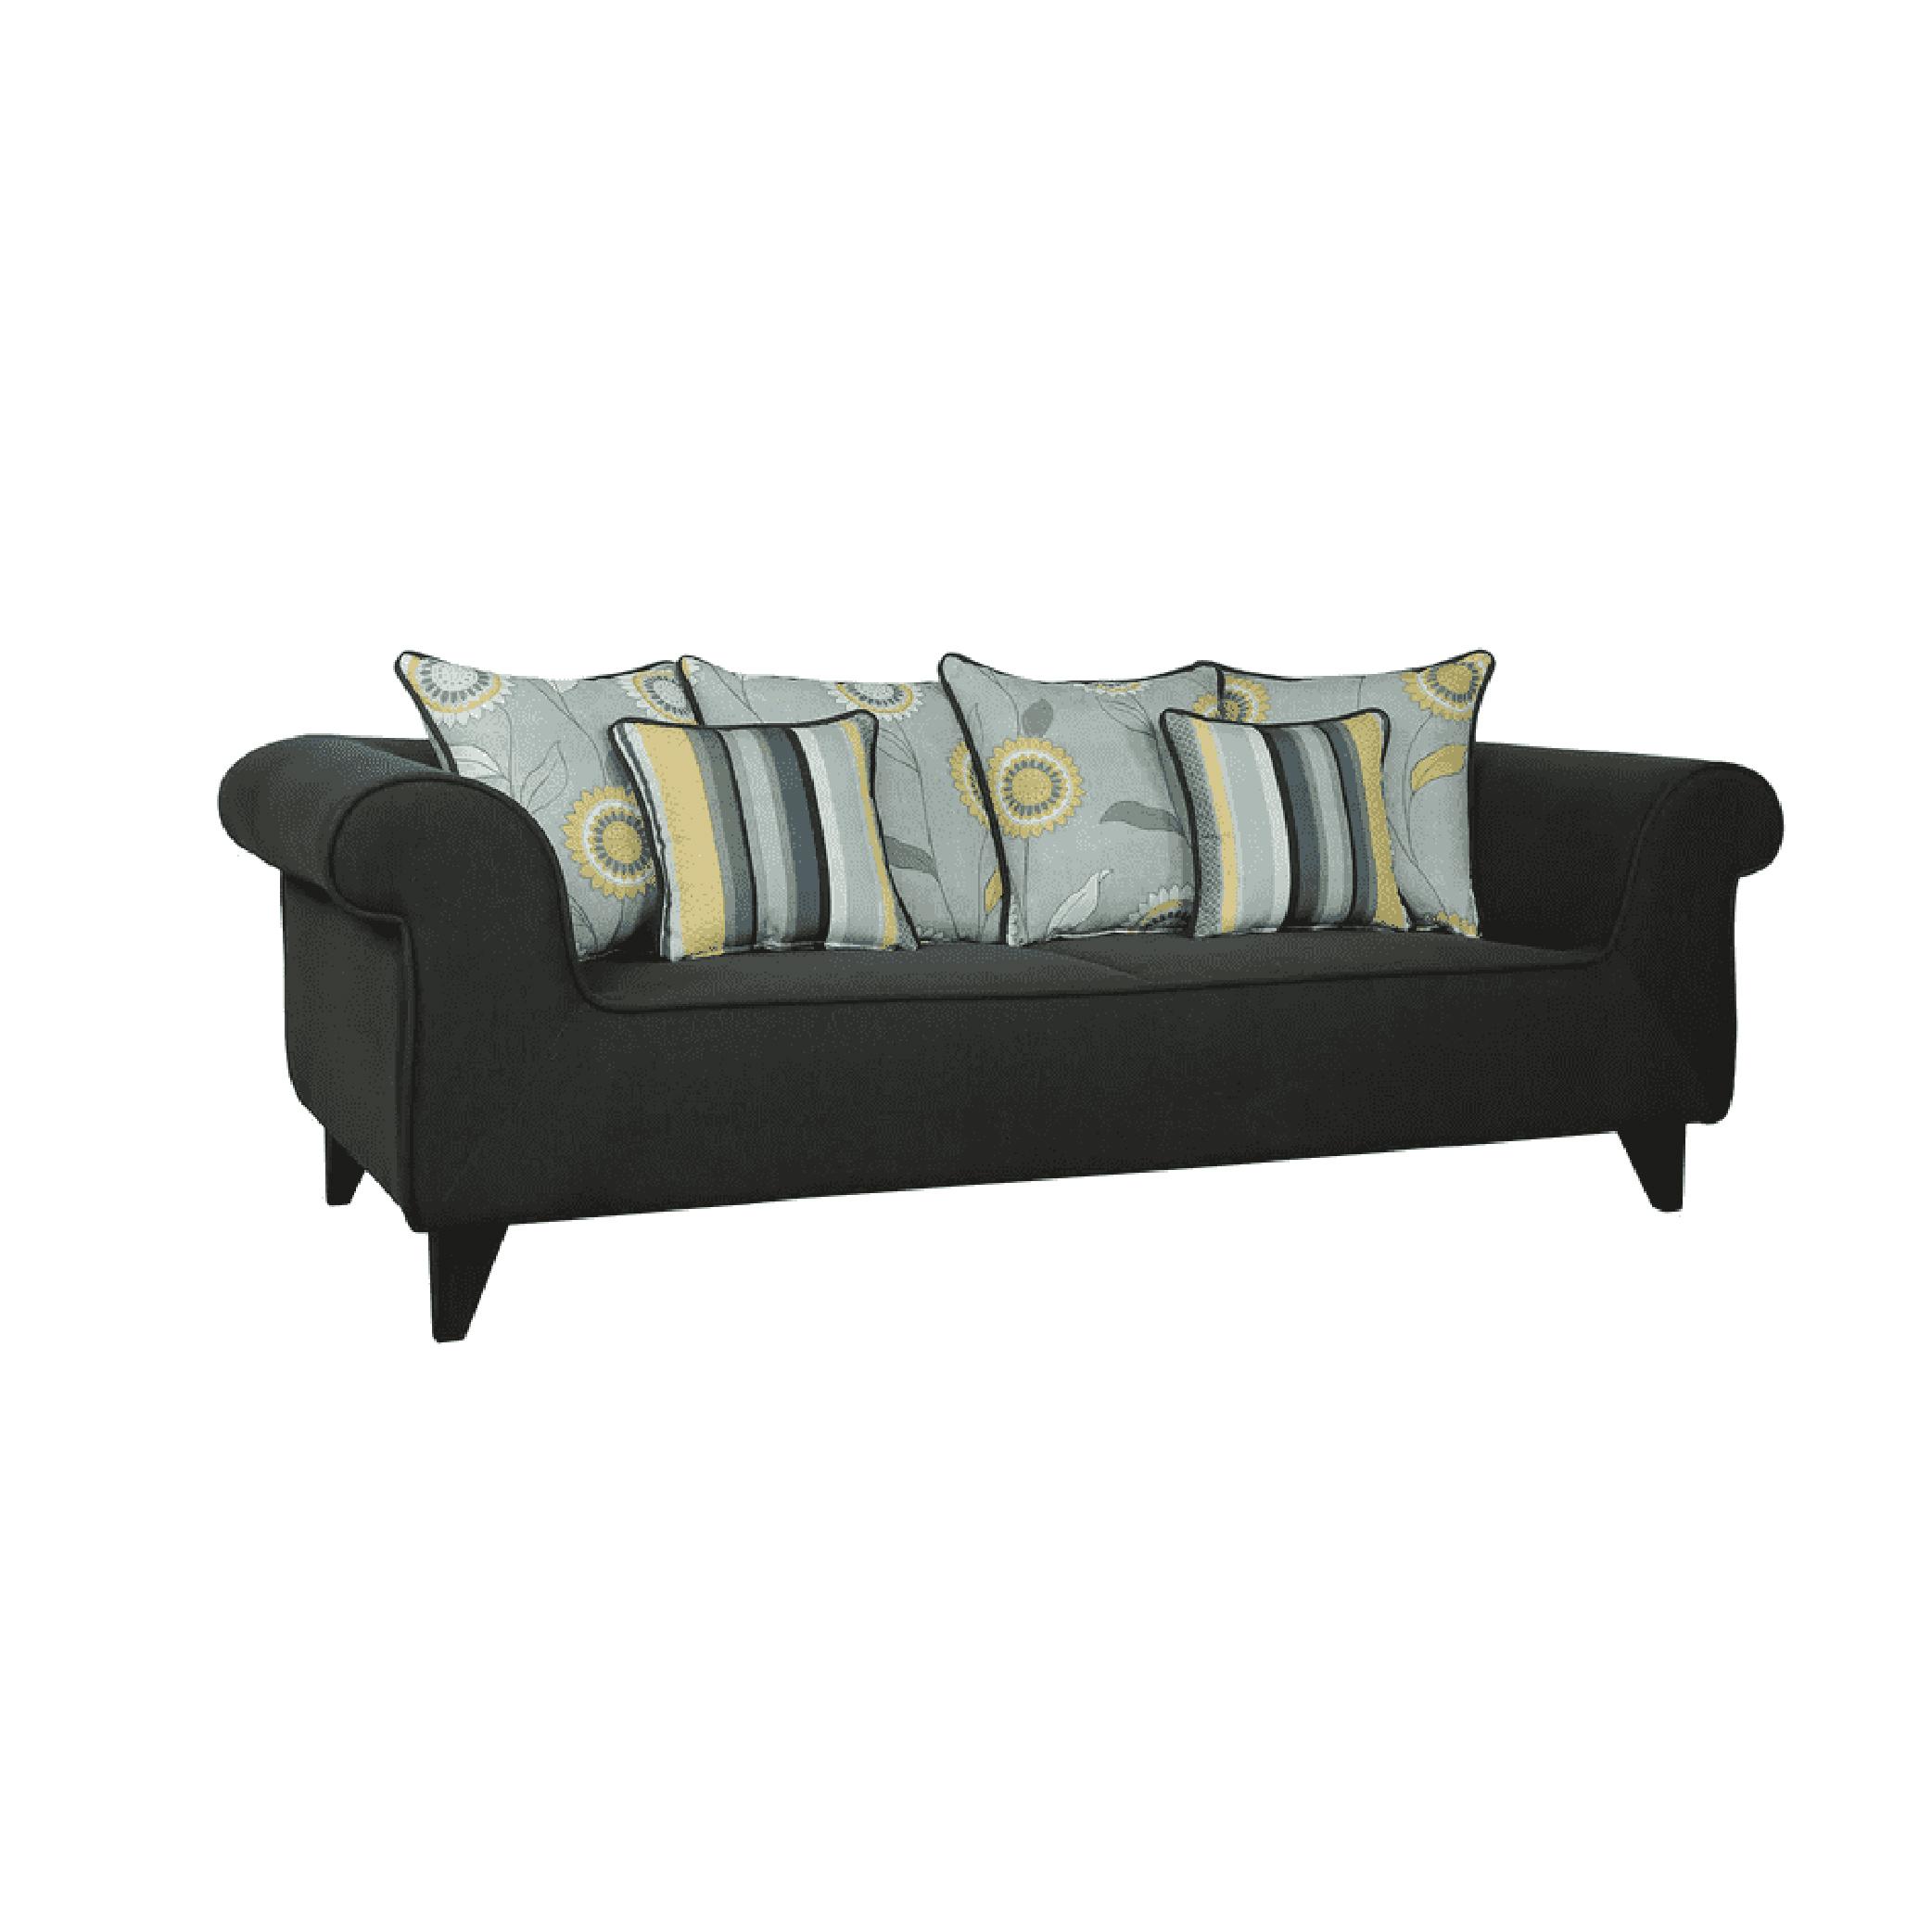 Salerno Three Seater Sofa in Charcoal Grey Colour